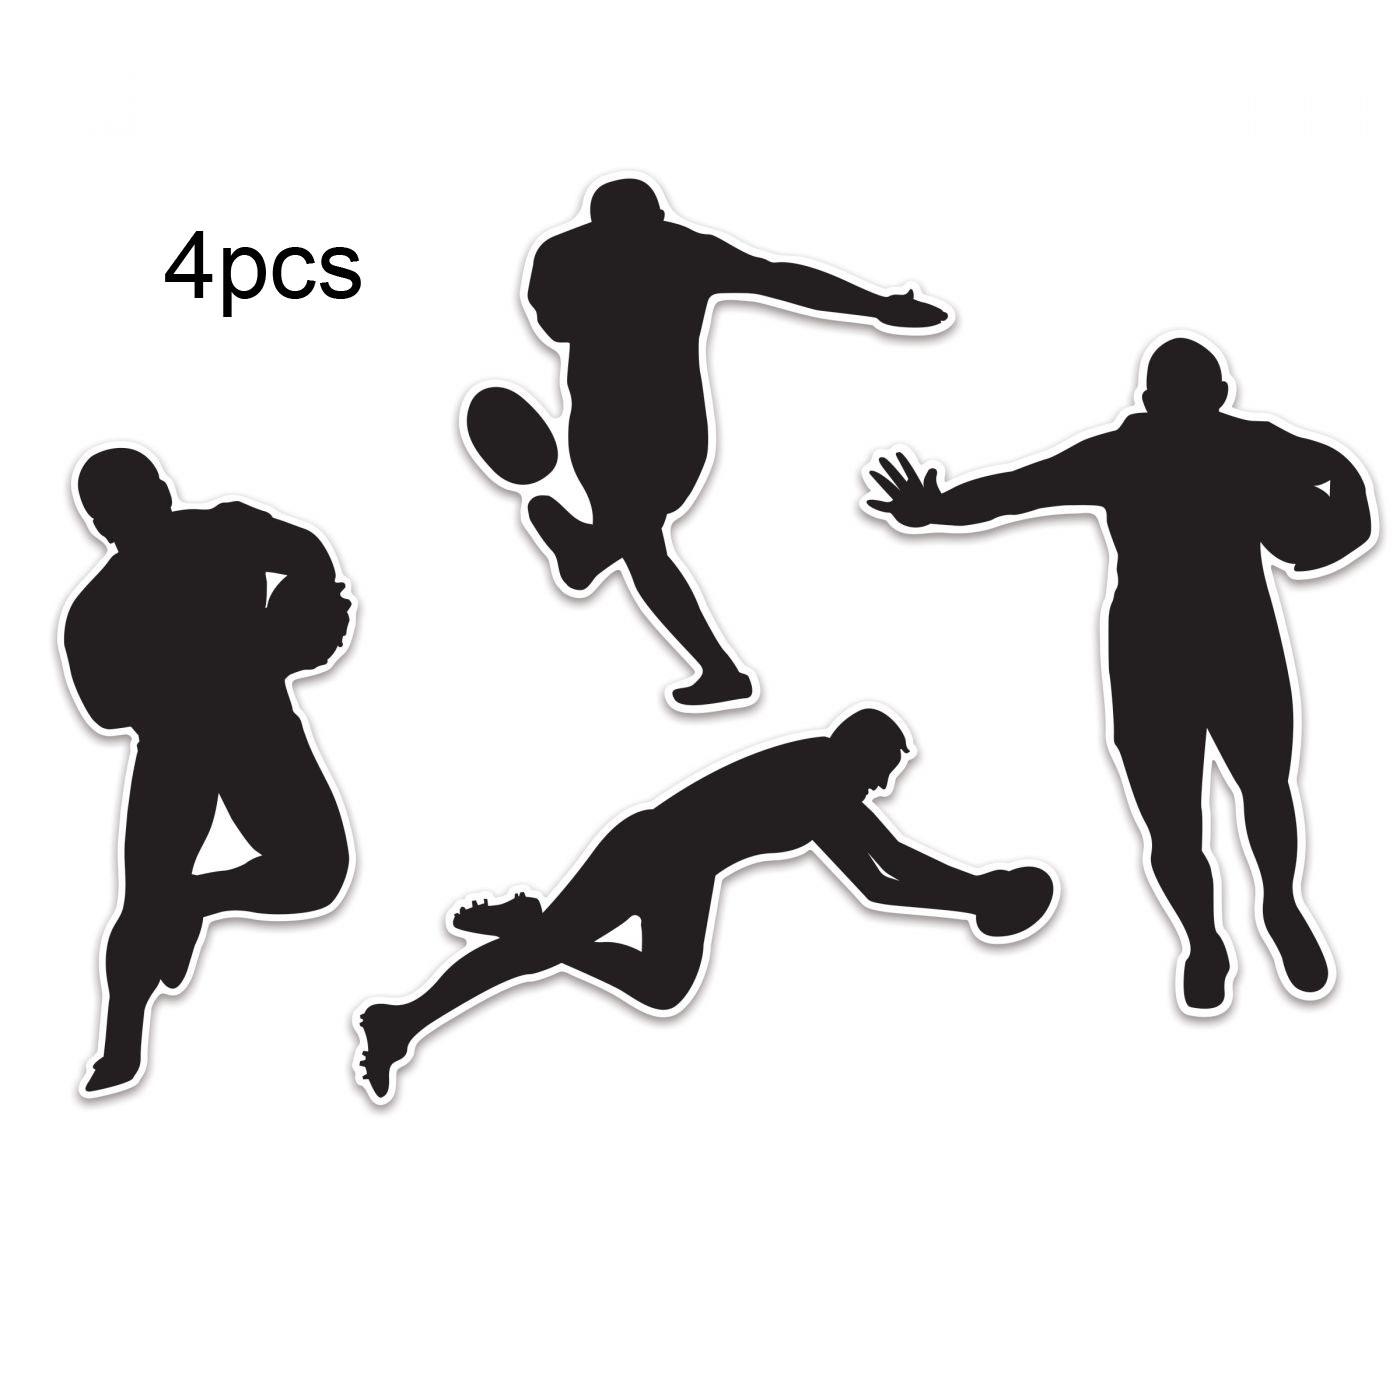 Pk4 Rugby Player Silhouette Cutout Decorations by Beistle ZSI00028I available here at Karnival Costumes online party shop